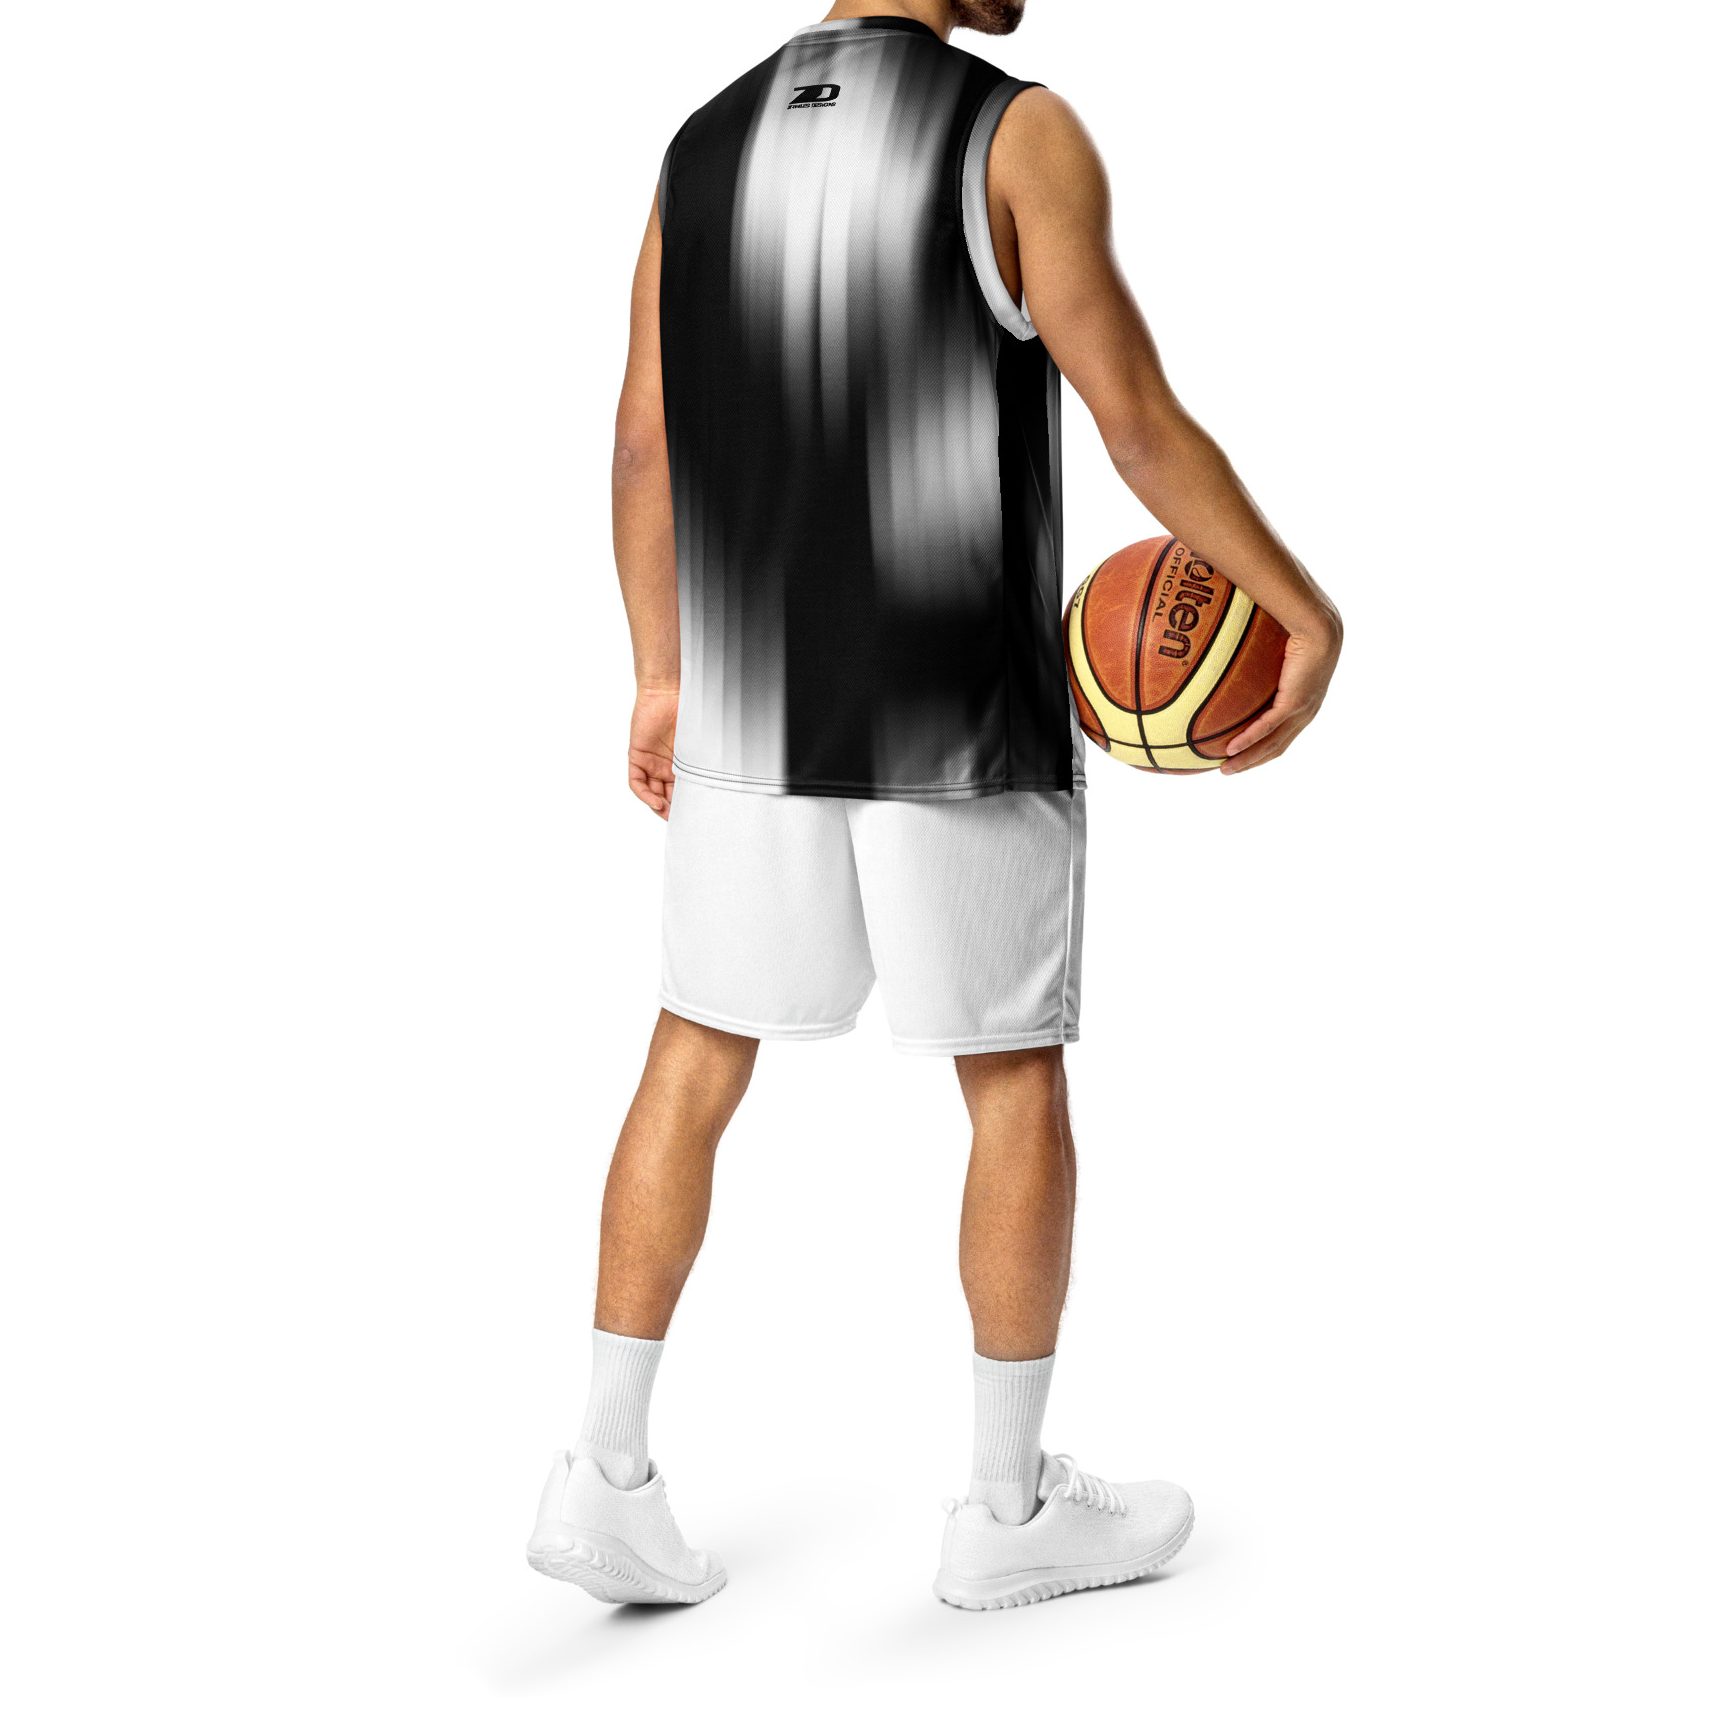 basketball jersey black and white by Zawles Designs